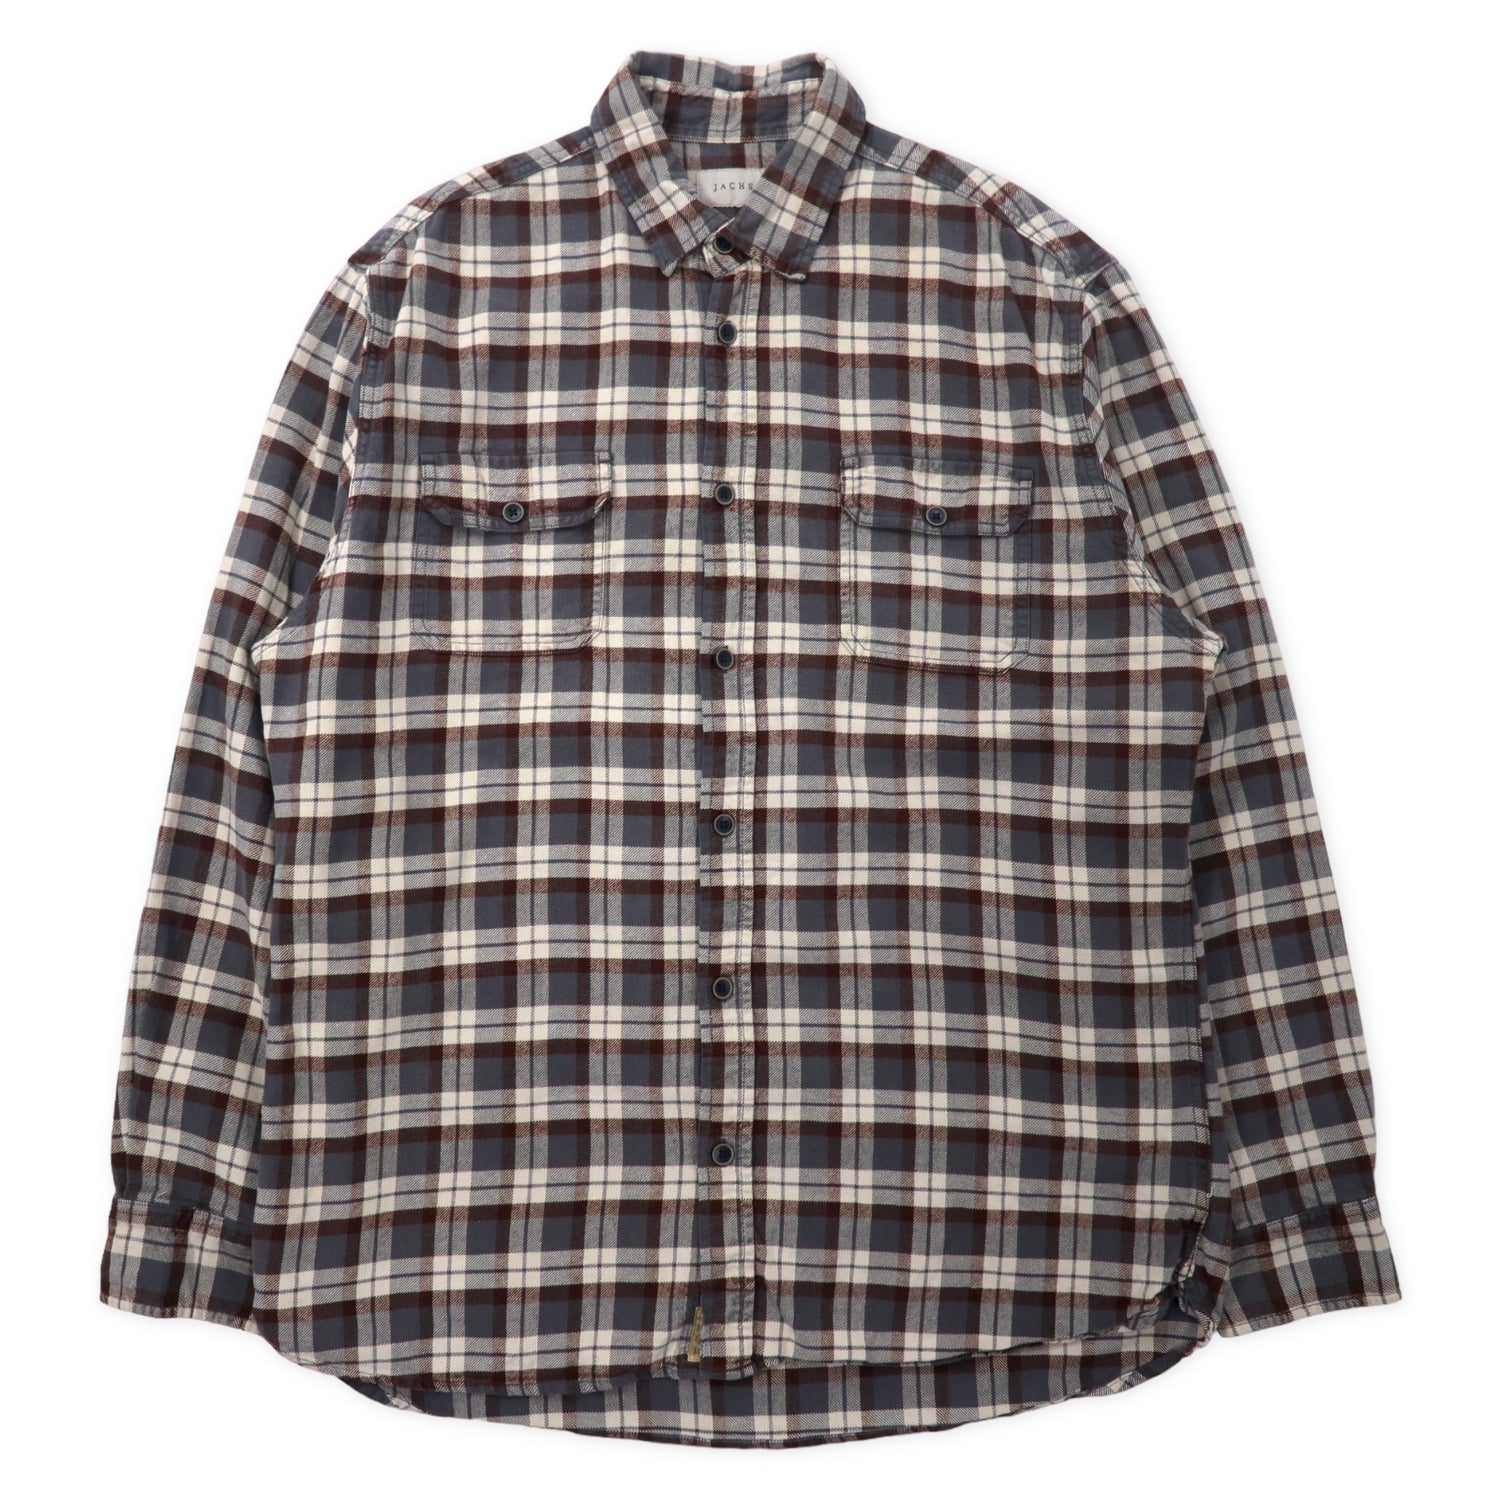 JACHS Heavy FLANNEL SHIRT XL Gray Brown CHECKED Cotton Big Size ...